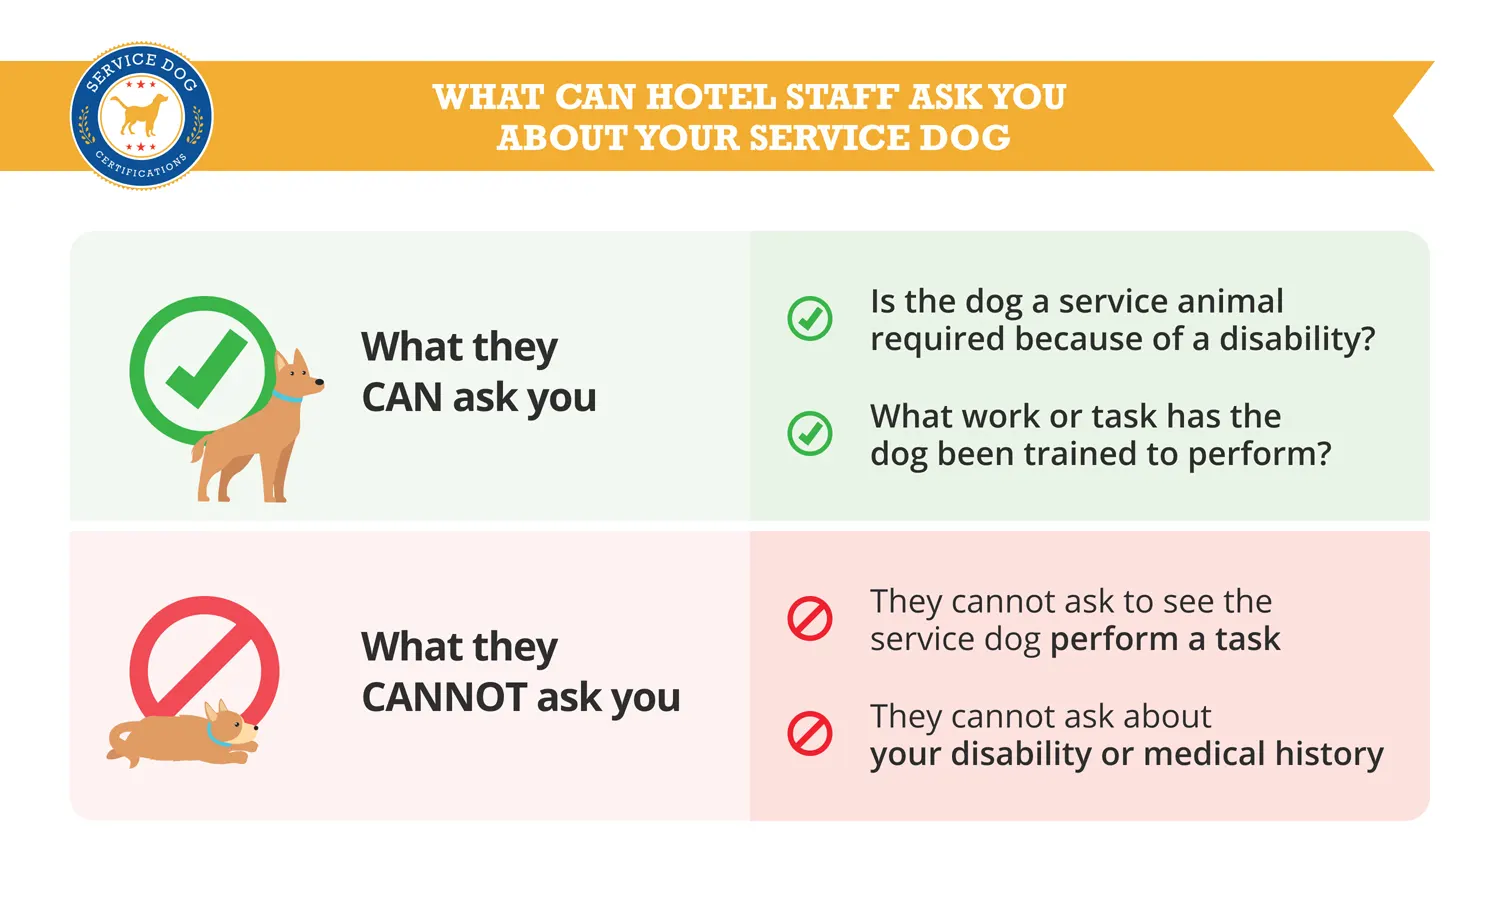 What can hotel staff ask about your service dog - Infographic